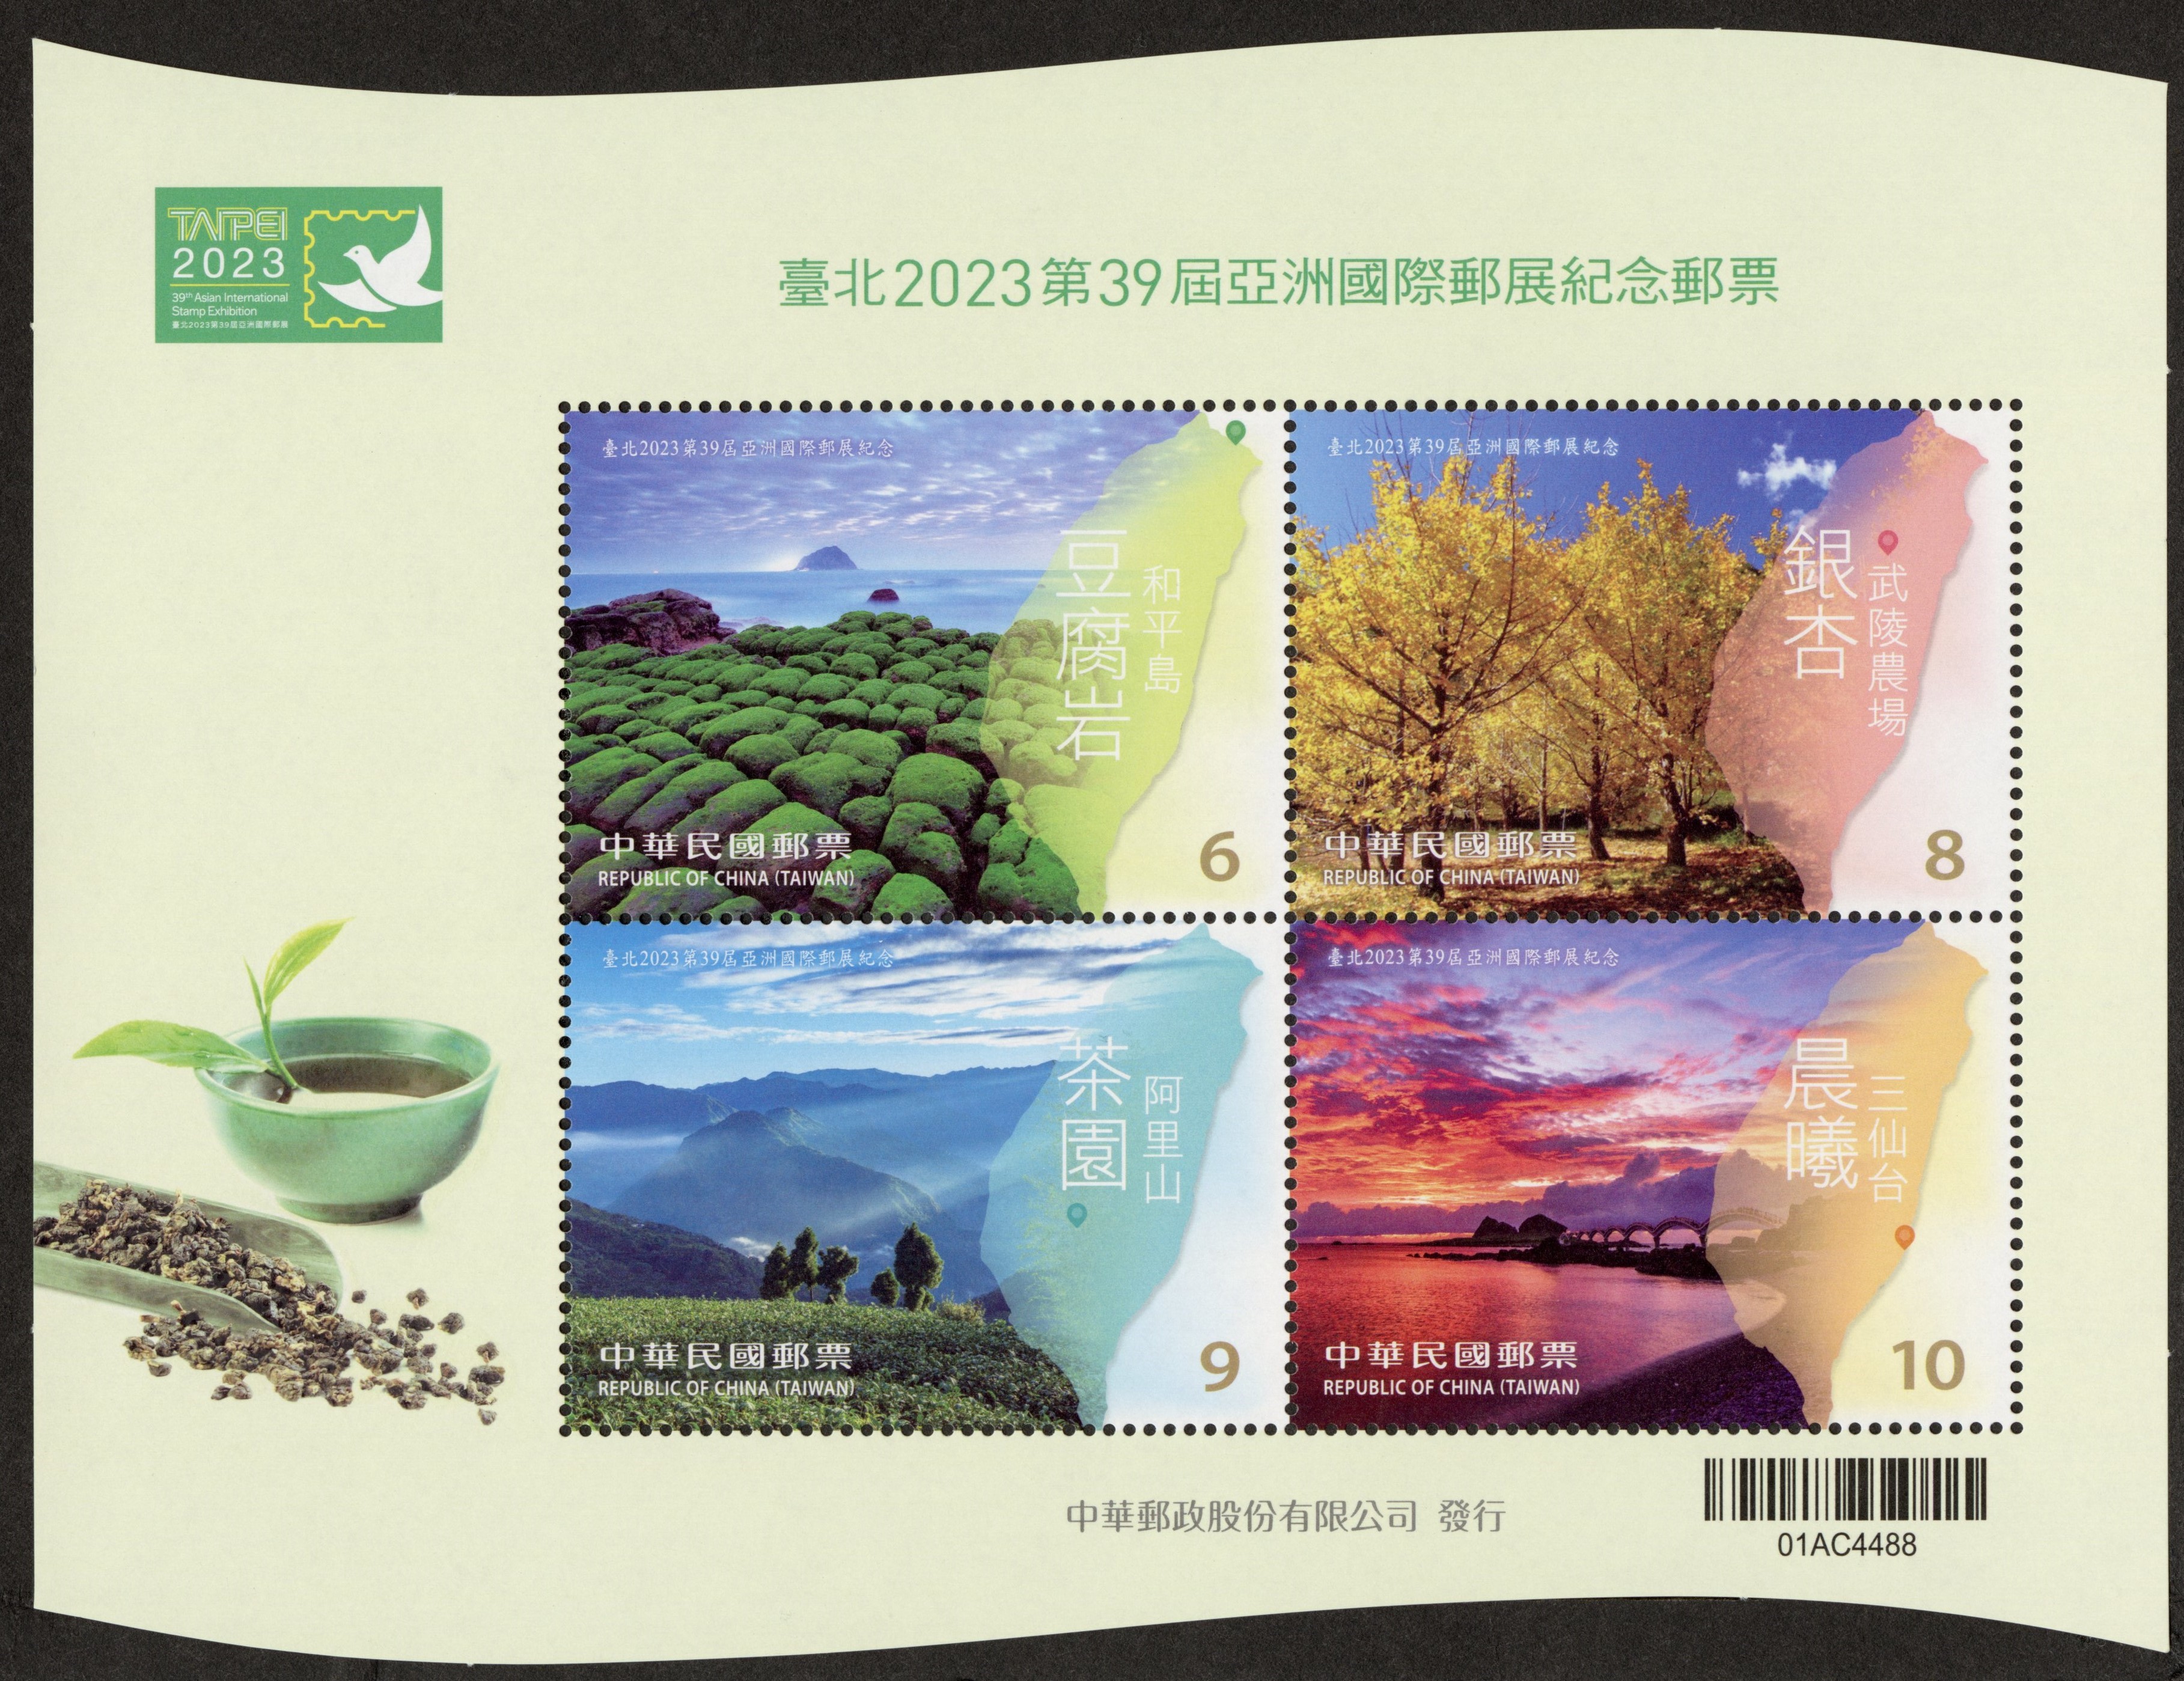 TAIPEI 2023 – 39th Asian International Stamp Exhibition Commemorative Issue